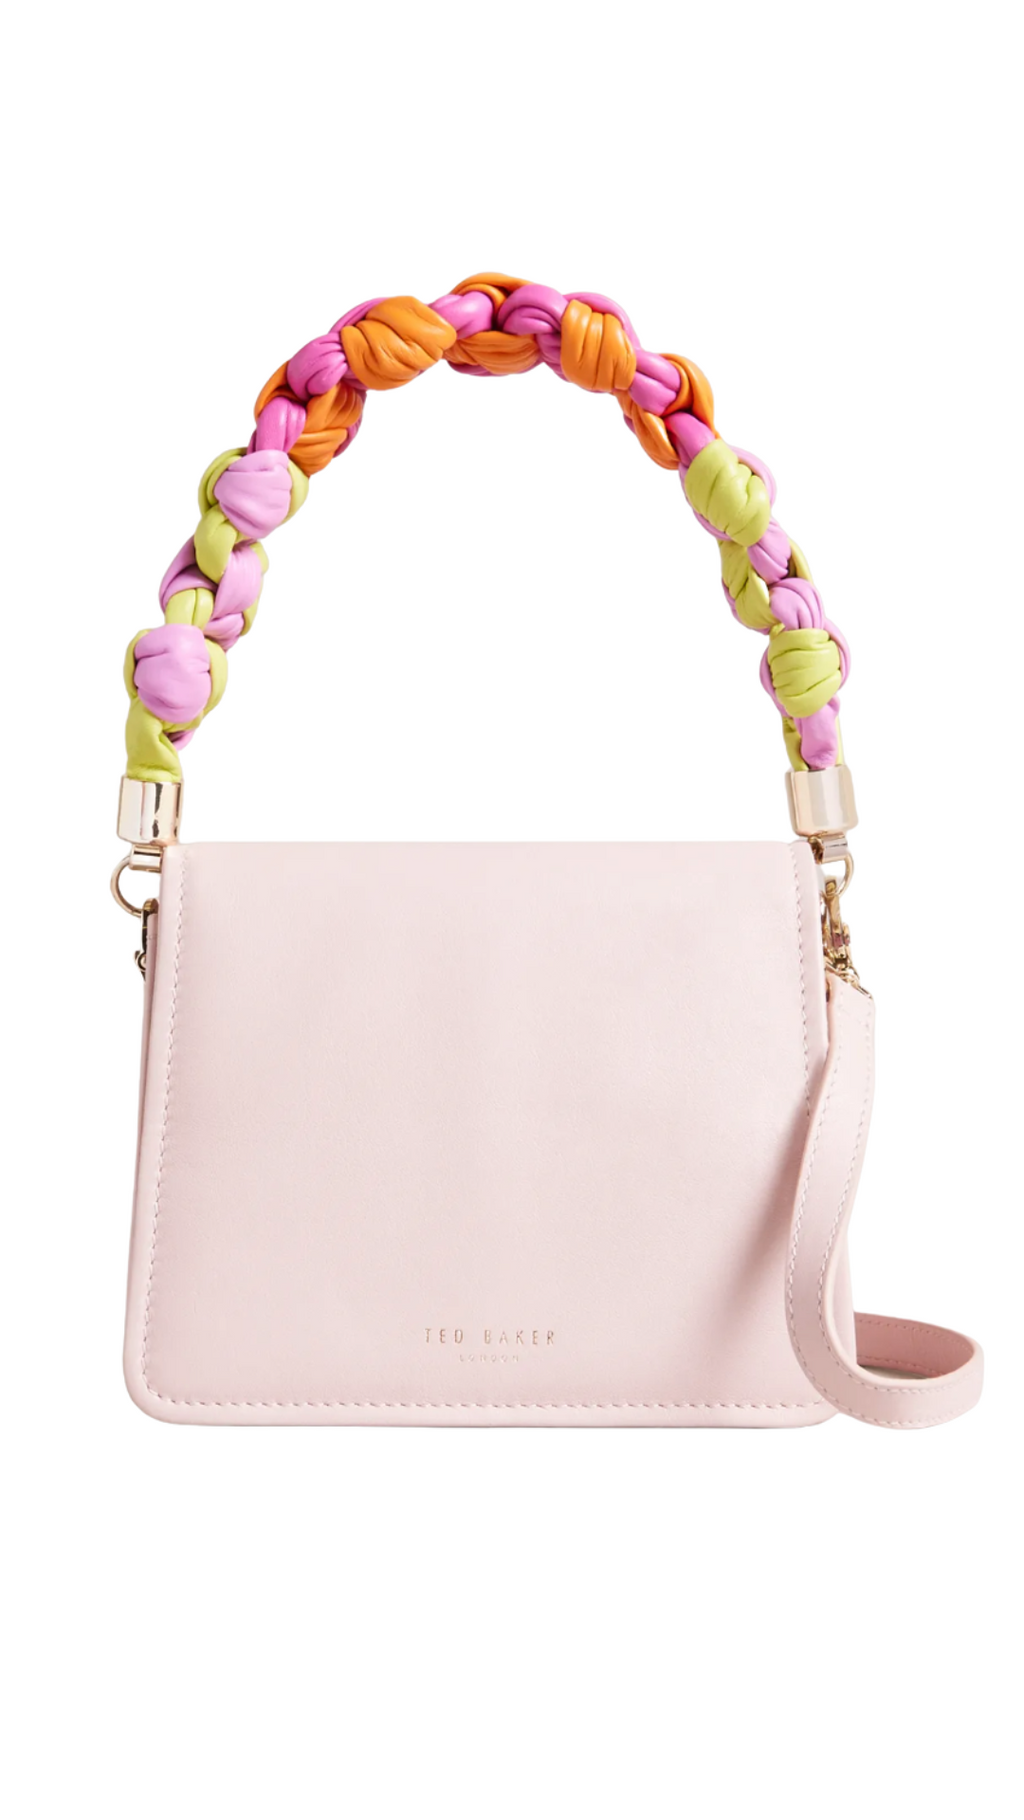 Ted Baker London Maryse Knotted Top Handle Crossbody Bag